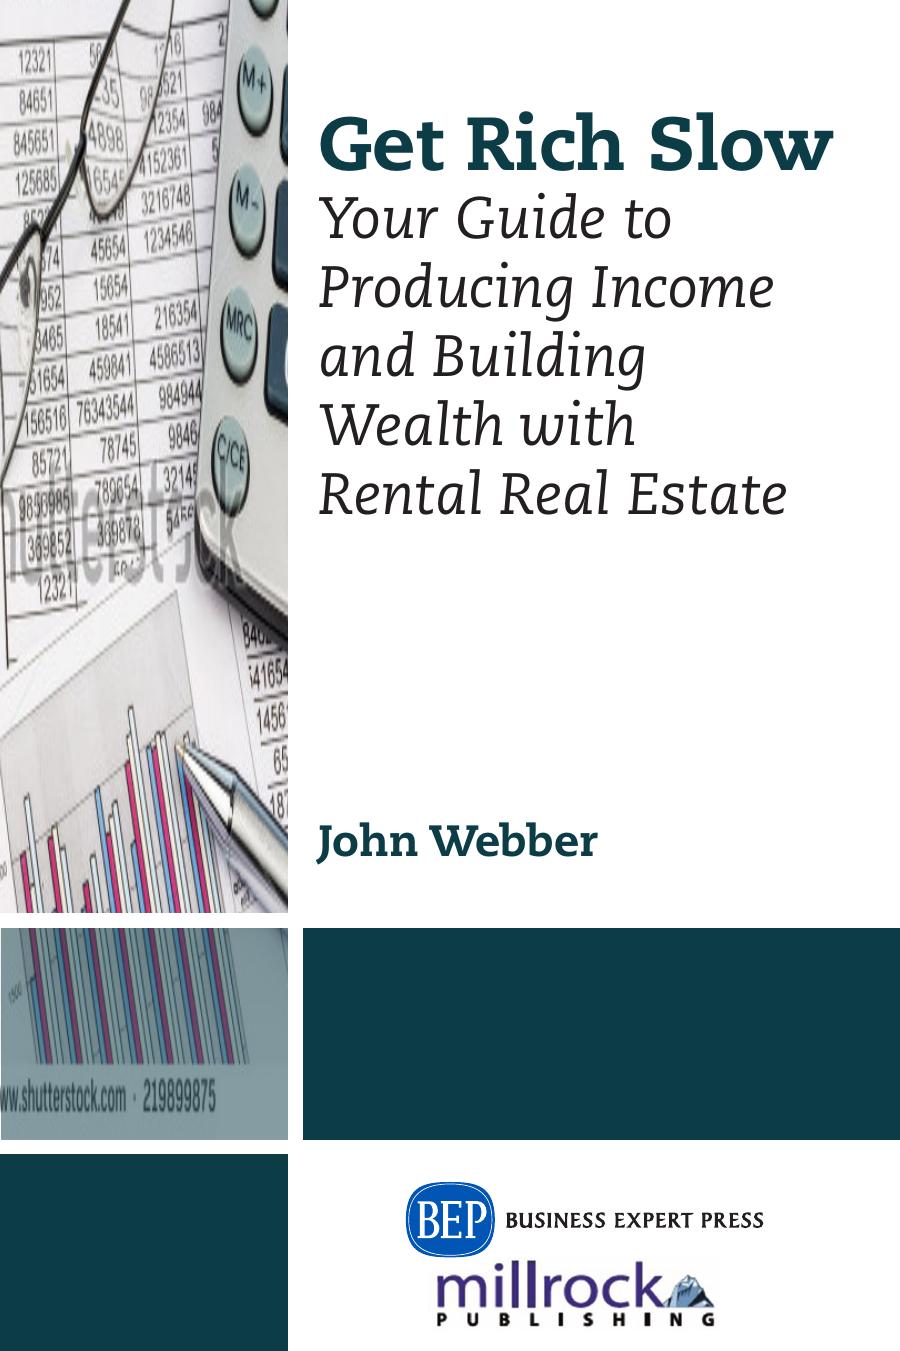 Get Rich Slow: Your Guide to Producing Income & Building Wealth with Rental Real Estate